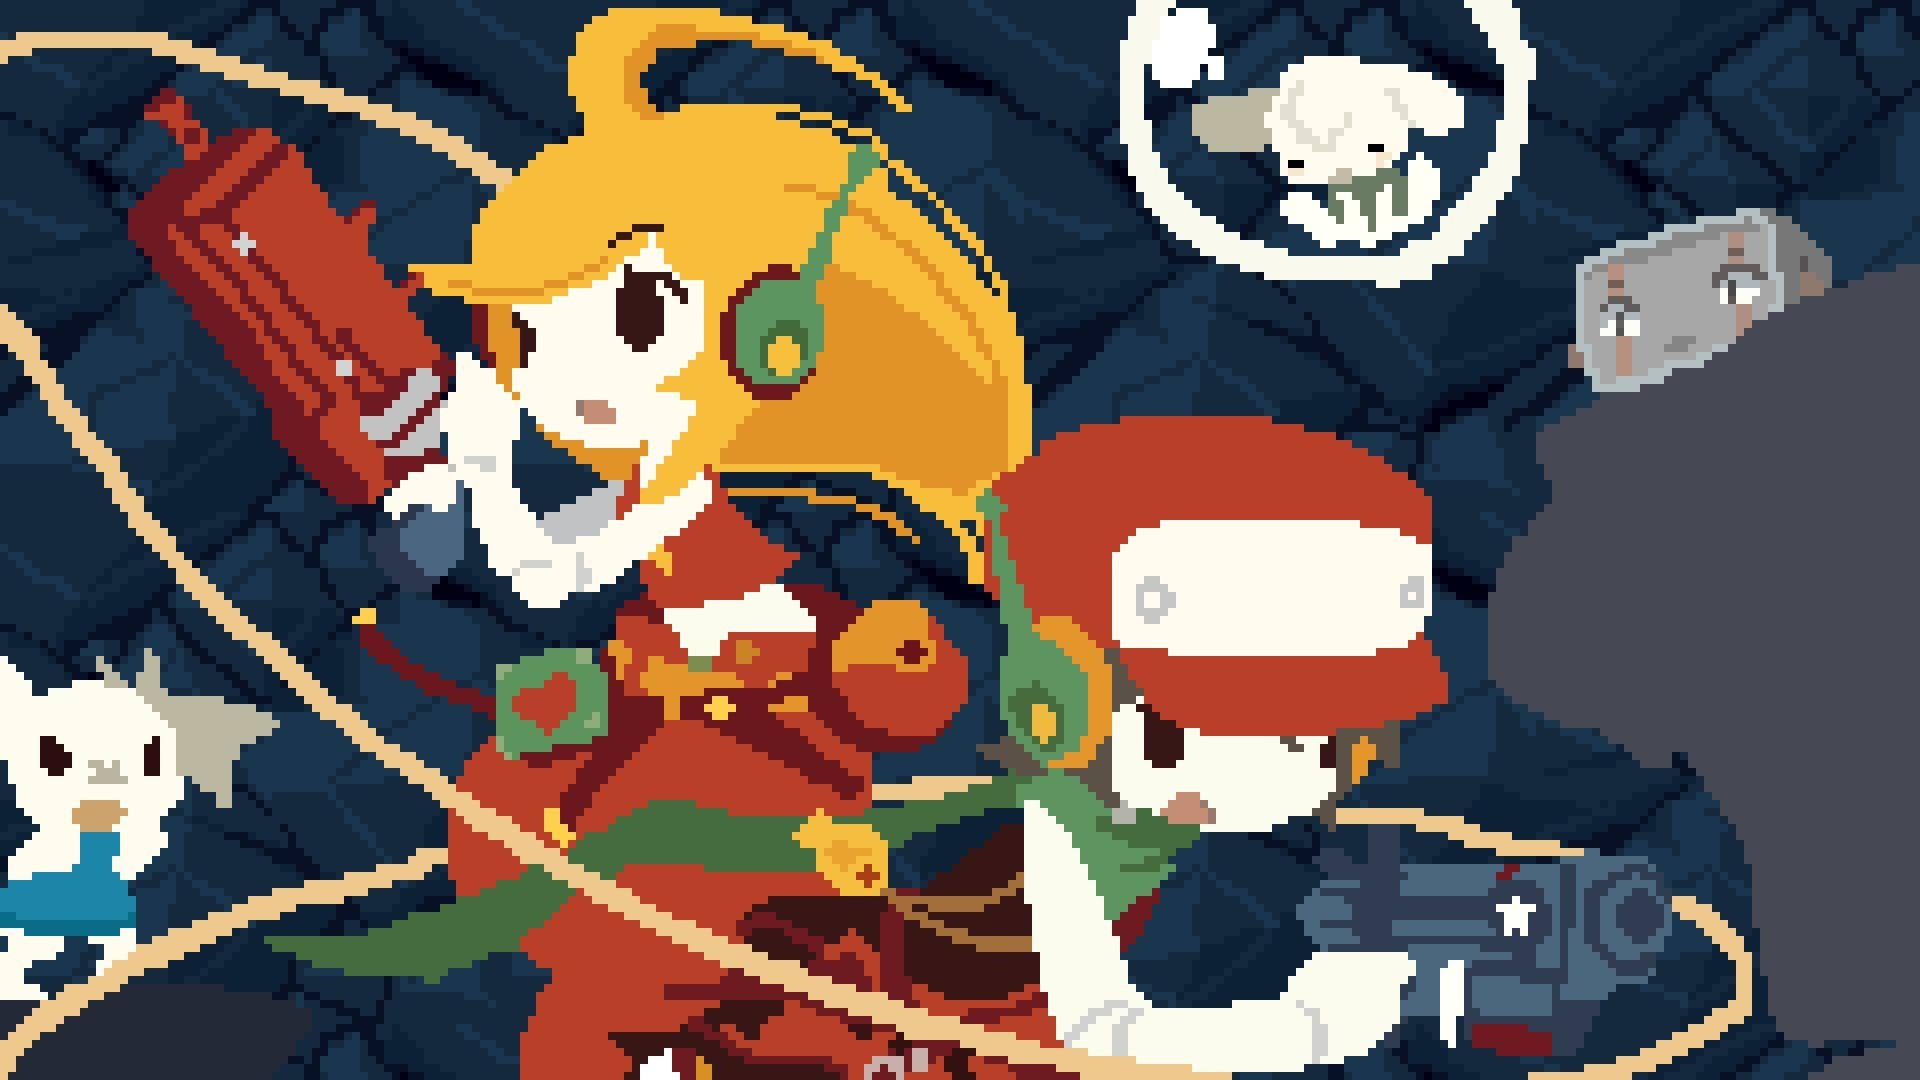 Side Scrolling Adventure Game Cave Story Is Coming To The Nintendo